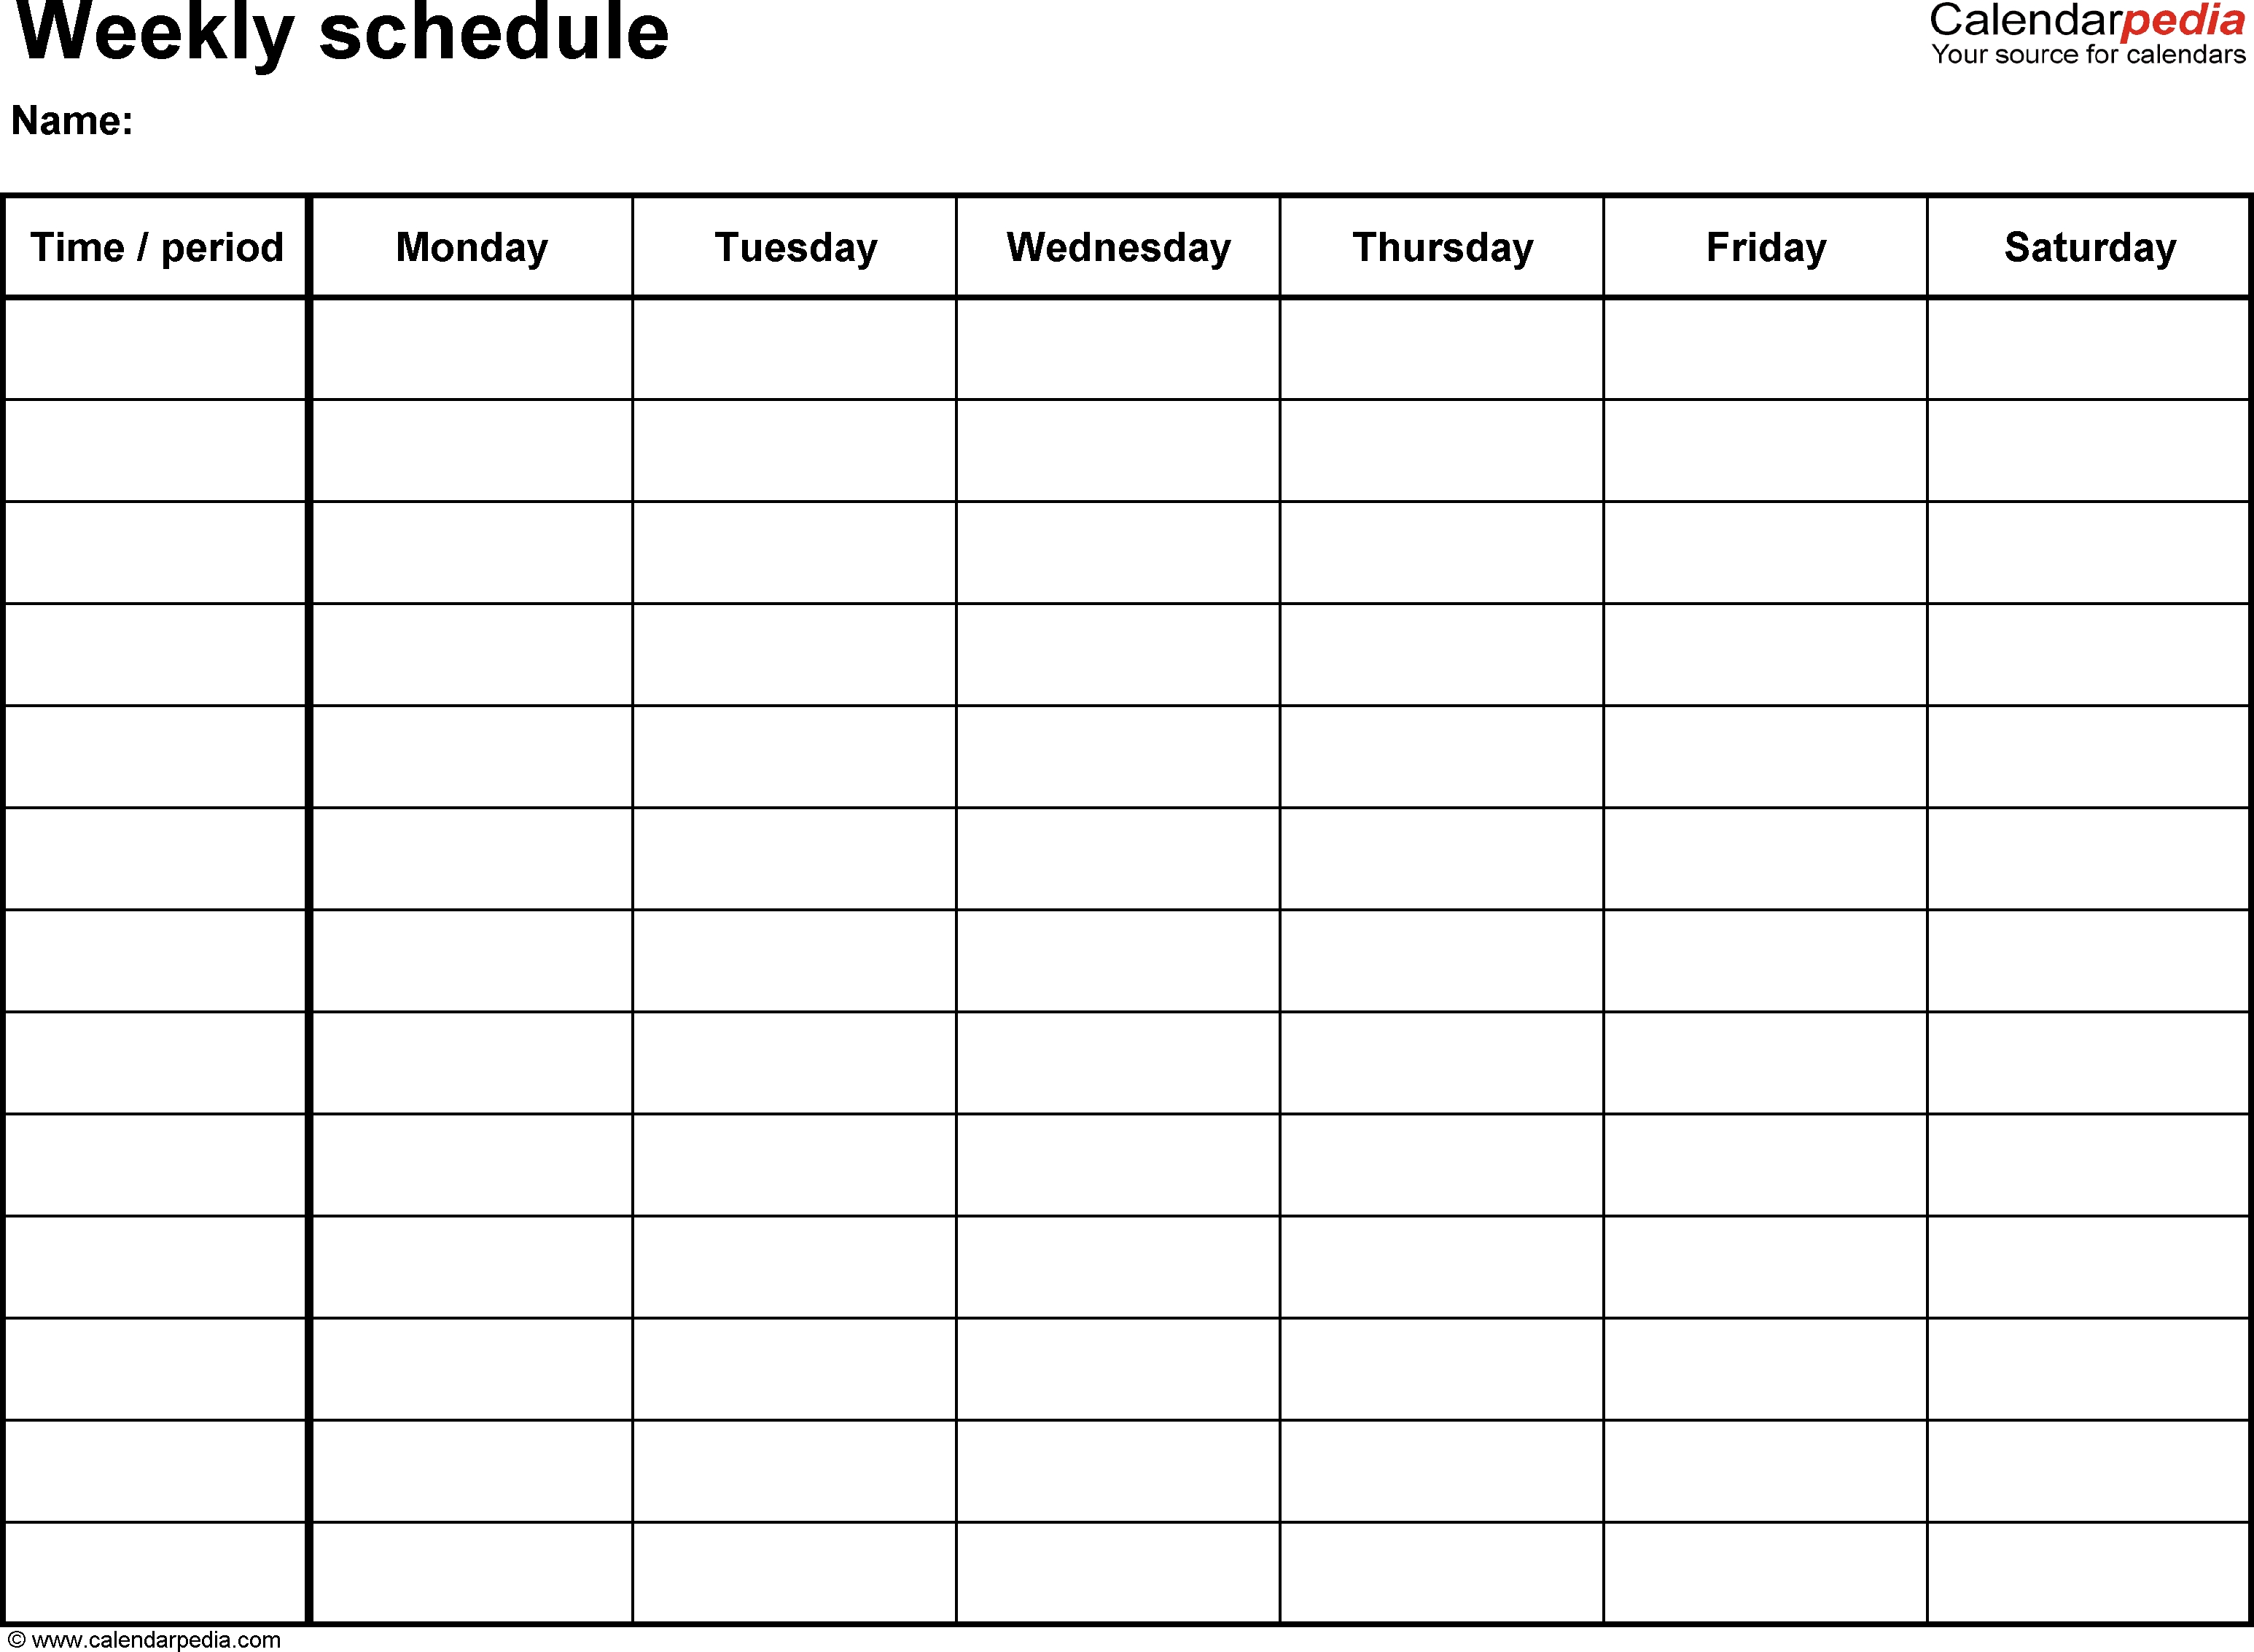 Free Weekly Schedule Templates For Word - 18 Templates-Five Day Monthly Calendar For Word